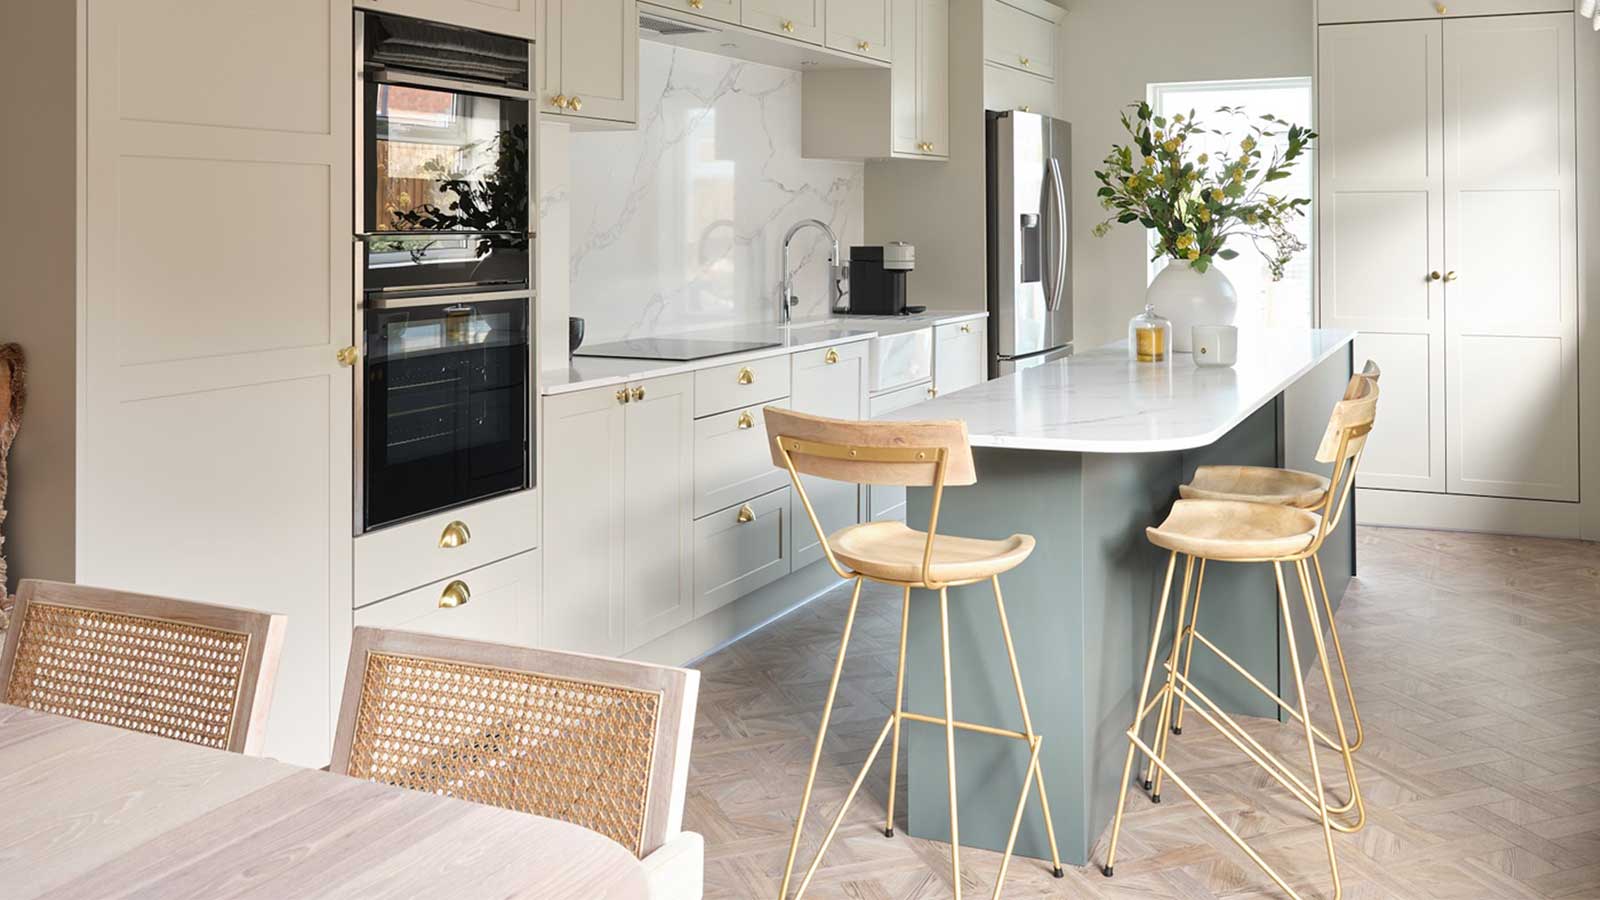 Galley-style kitchen with a kitchen island that makes a working triangle